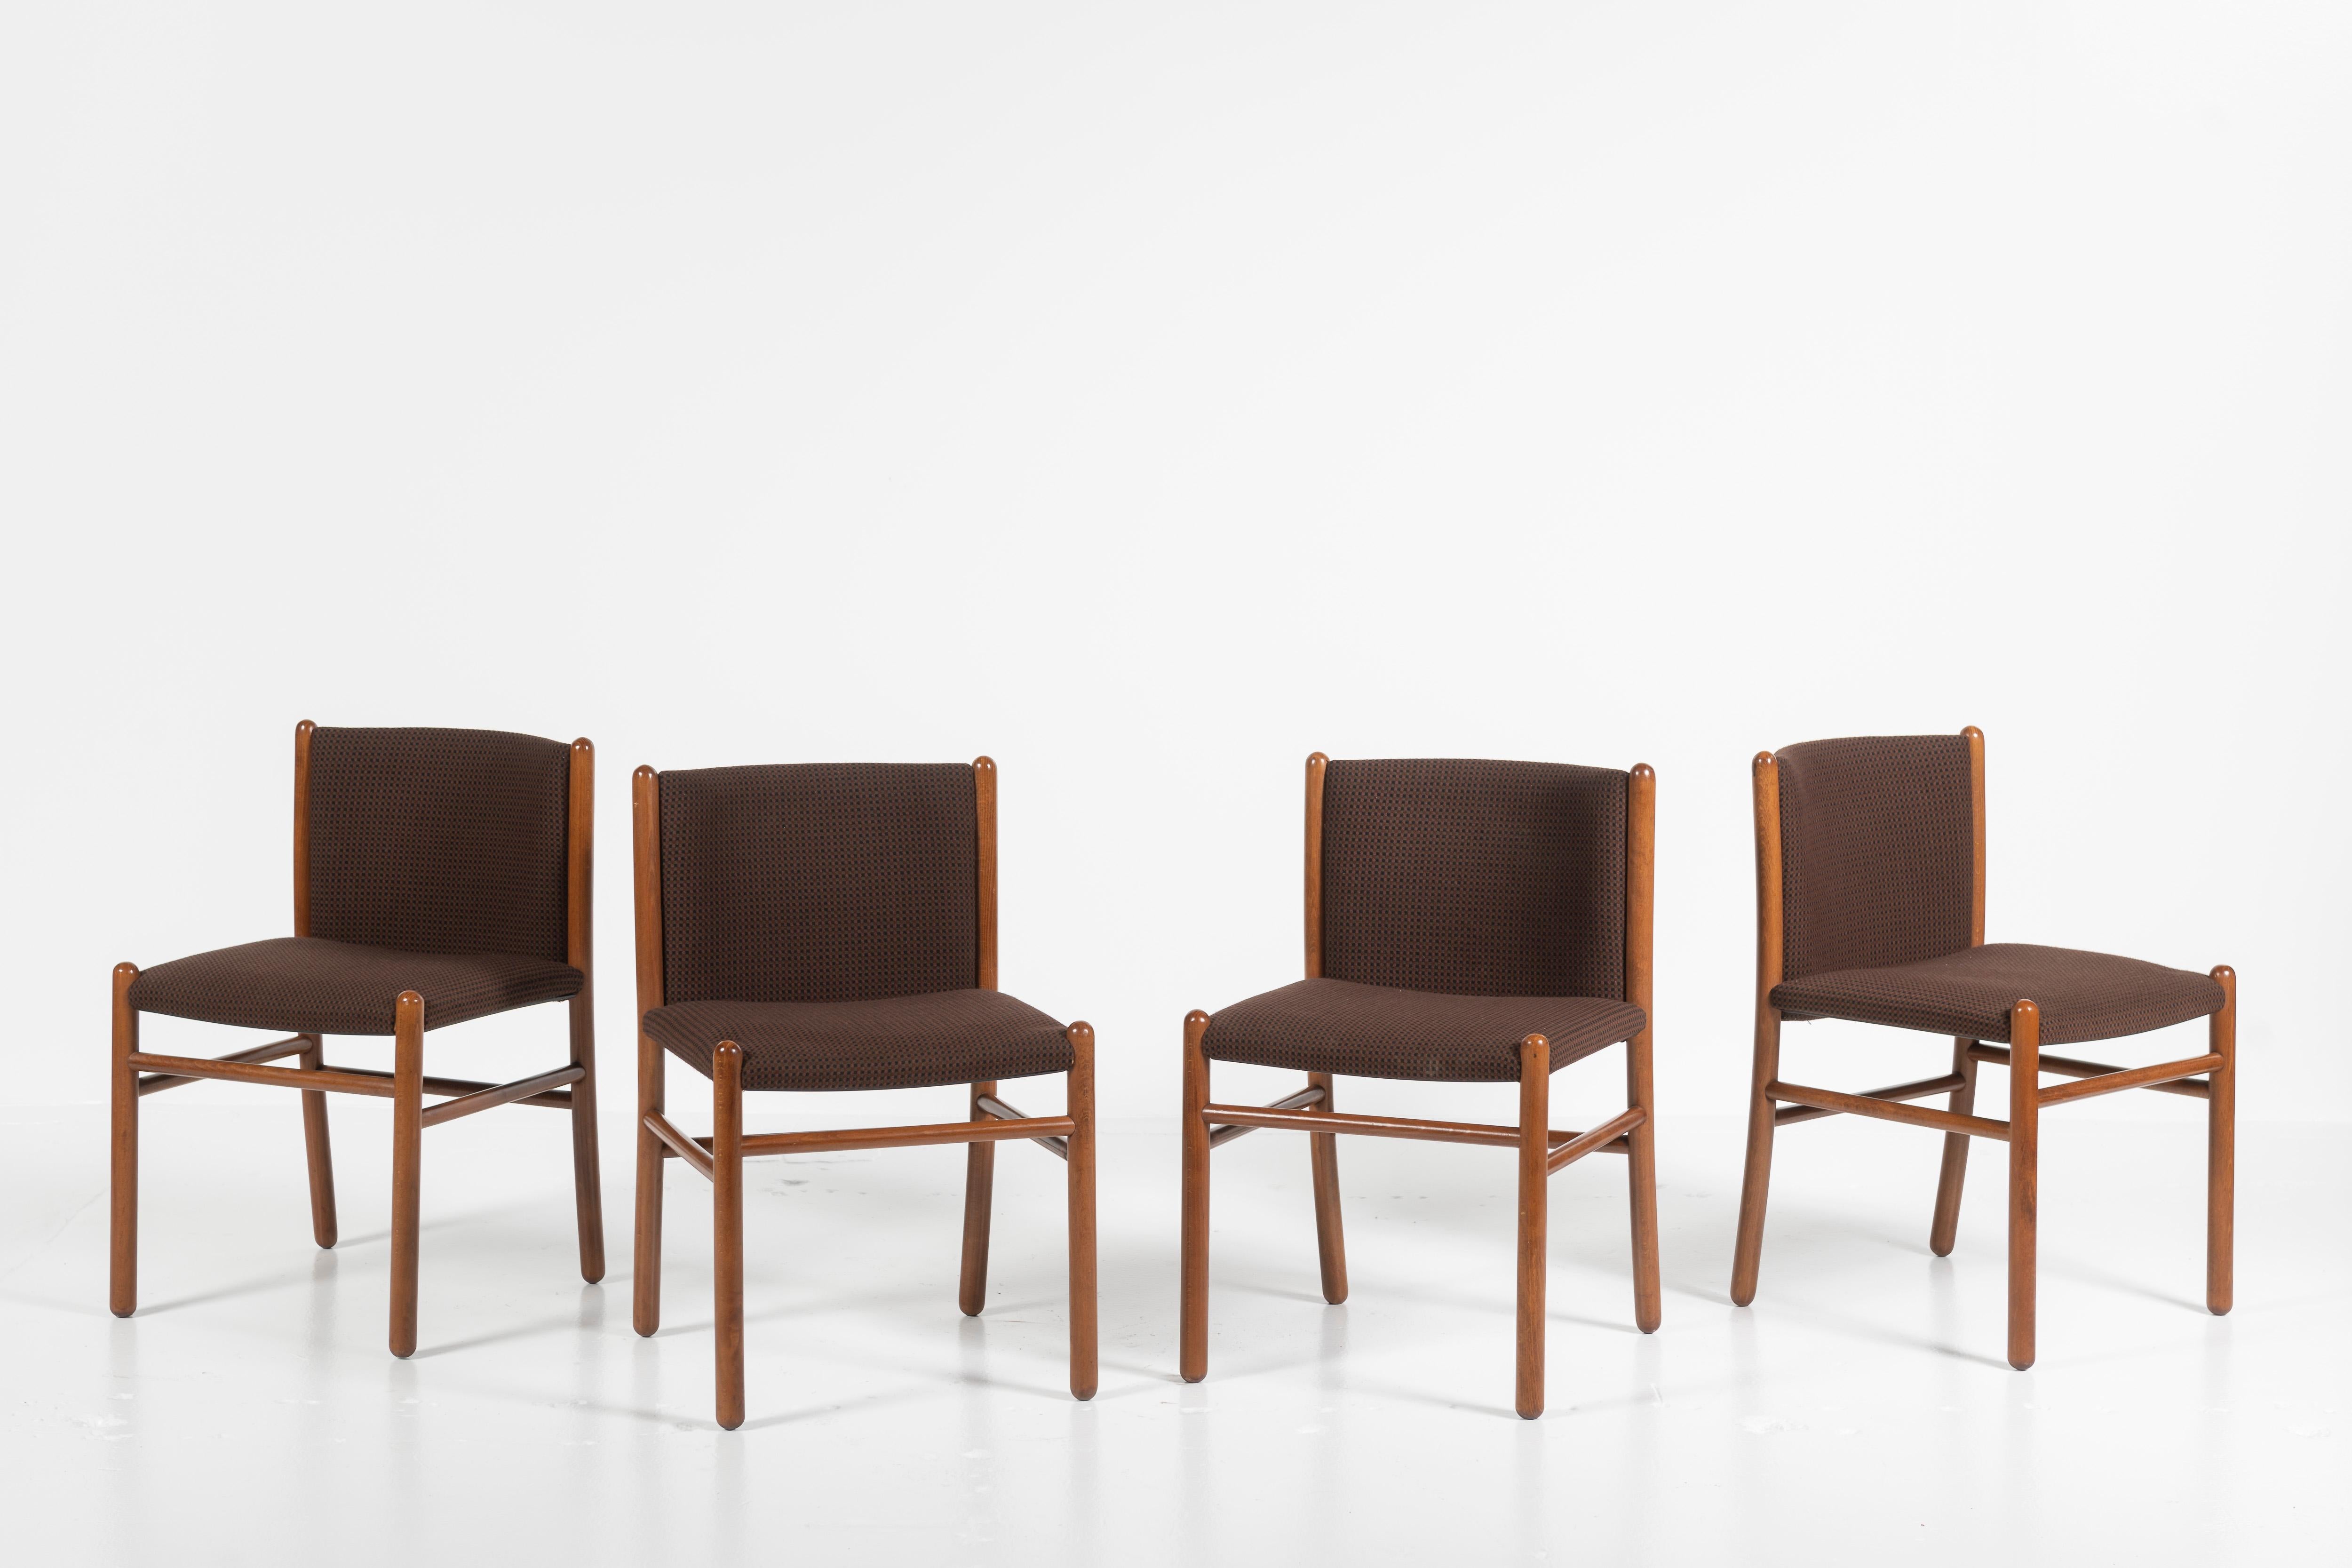 Italian Set of Four Mid-Century Modern Dining Chairs, Gianfranco Frattini, Italy, 1960s For Sale